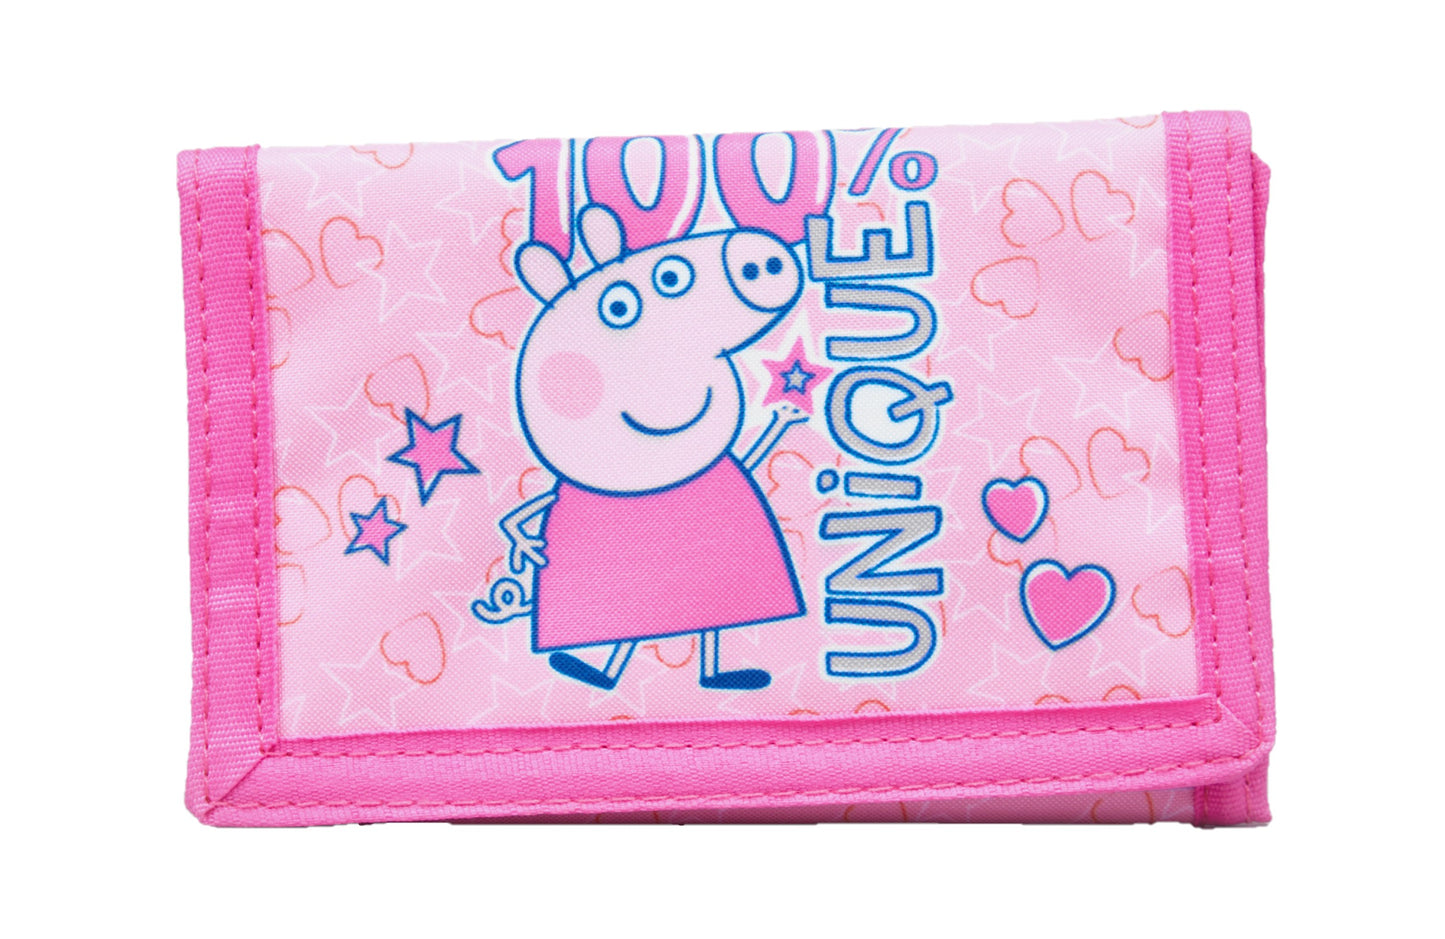 Children's Officially Licensed Character Trifold Wallet with Zipped Compartment